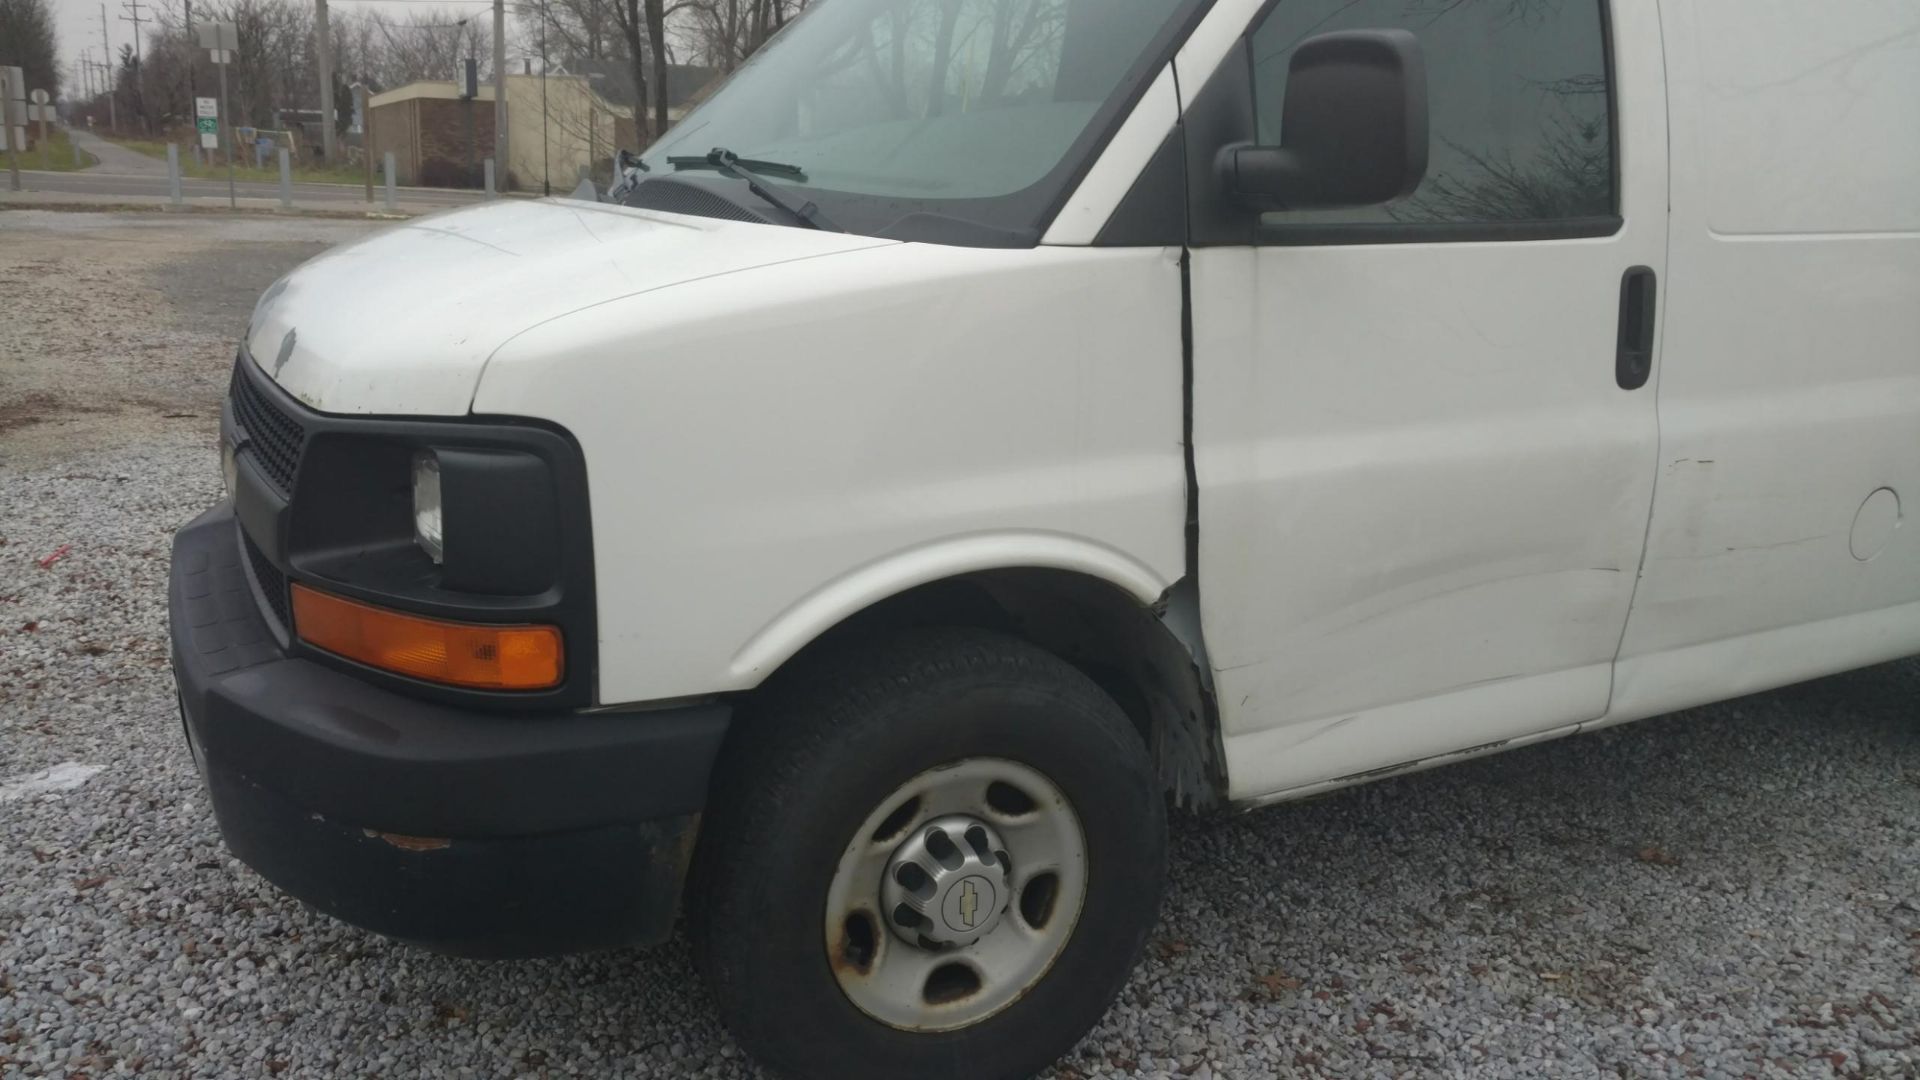 2010 Chevrolet Express Automatic, Air Conditioning, G2500, VIN: 1GCZGFDA1A1148324, 162,892 Miles - Image 3 of 10